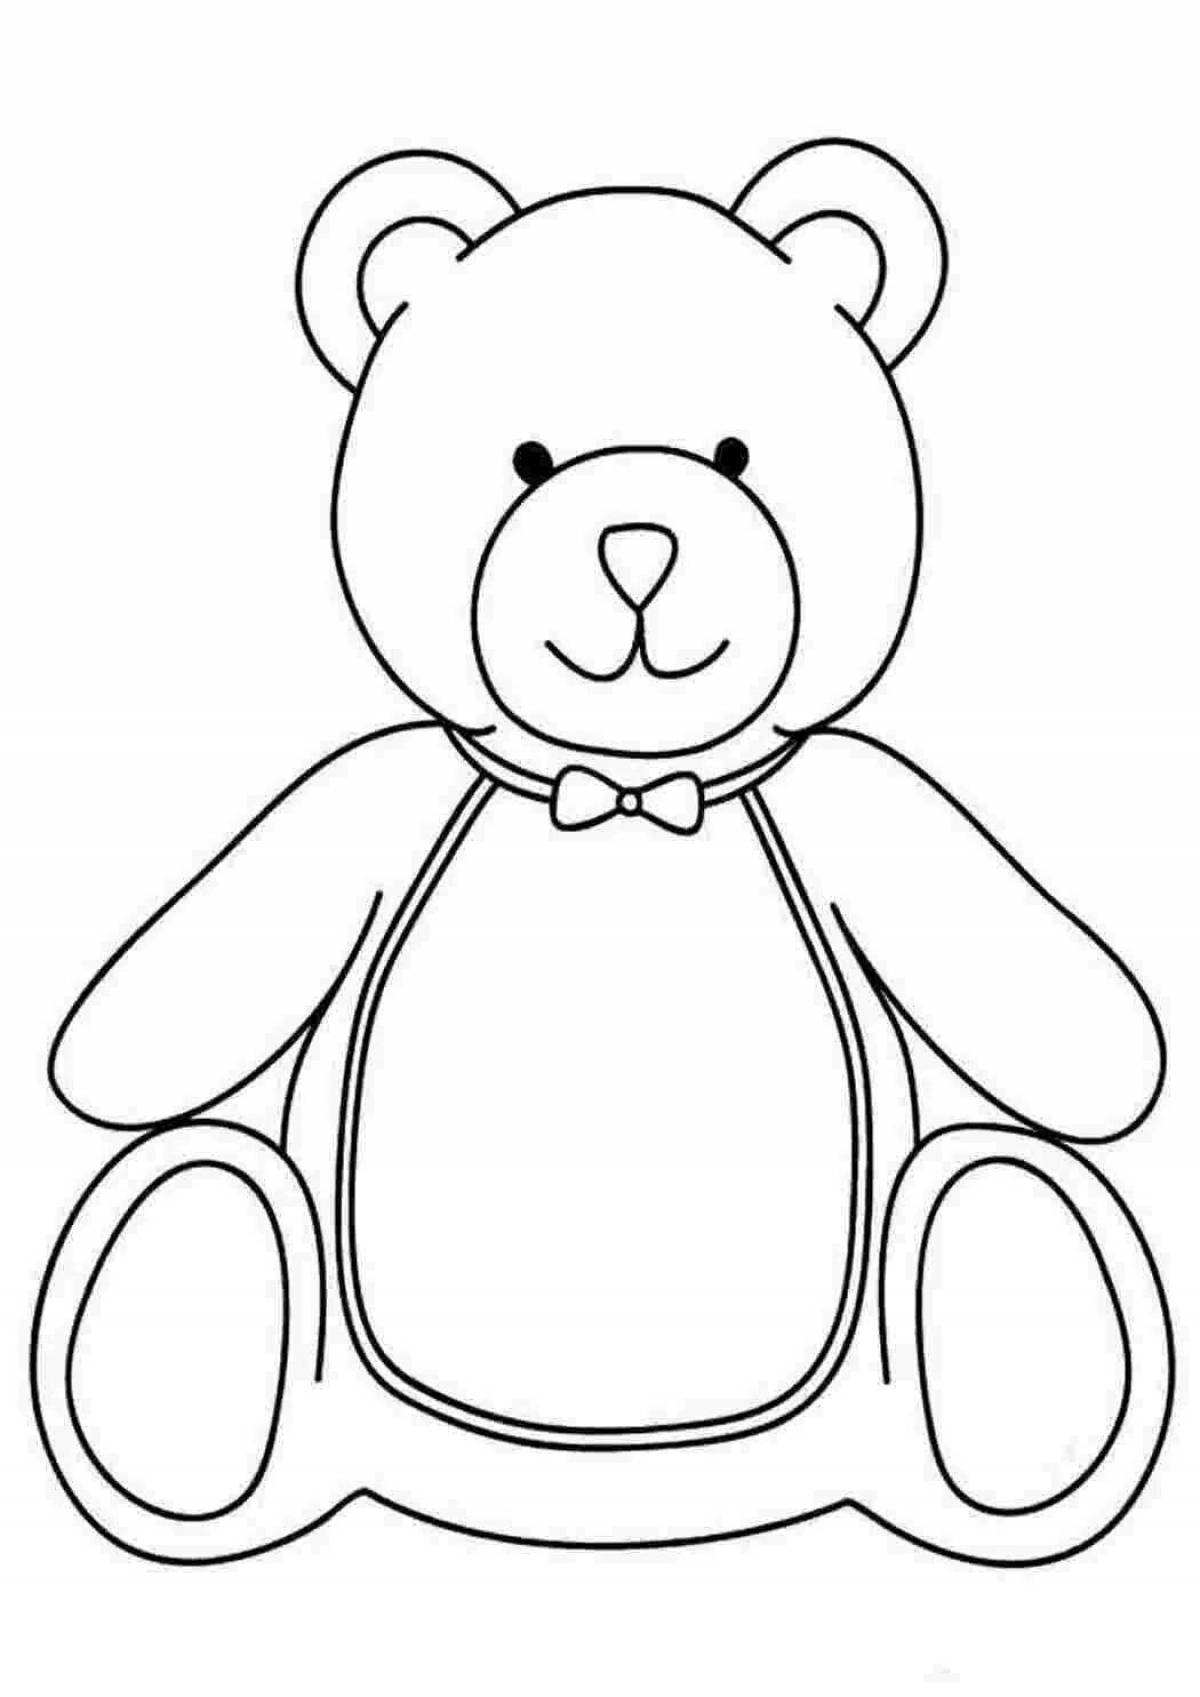 Coloring round teddy bear